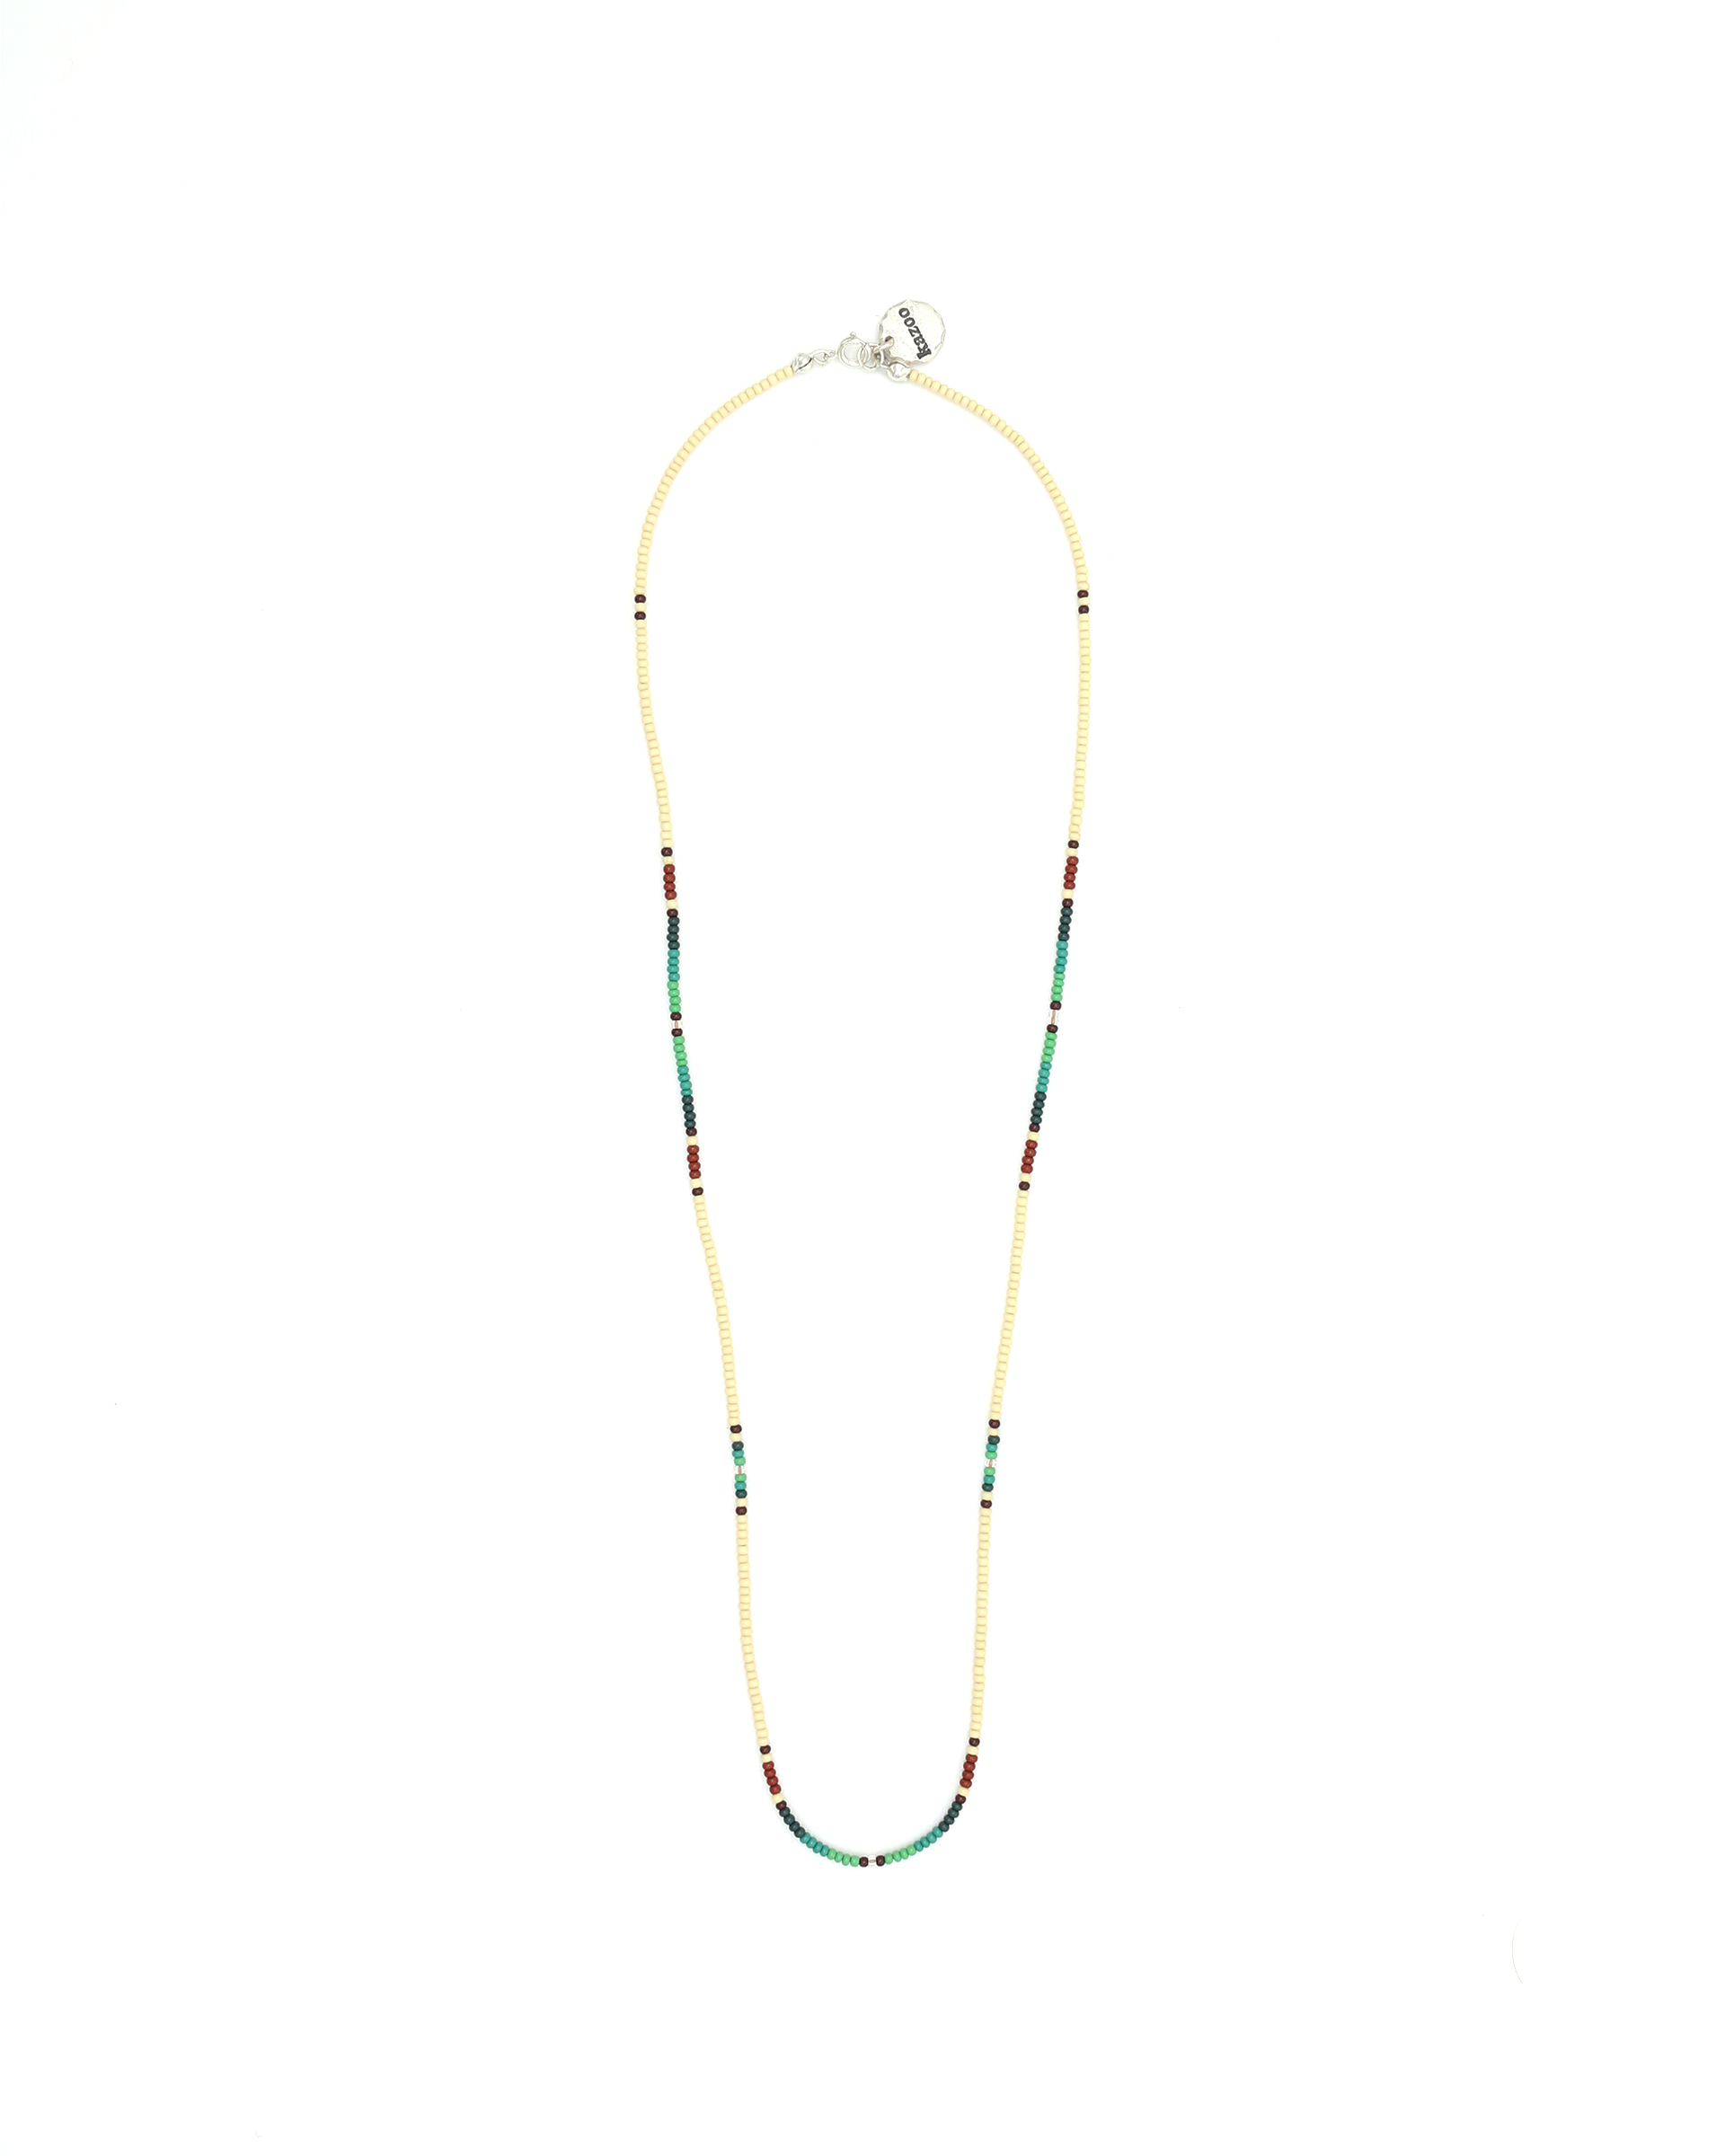 GREEN - BEIGE / BEADS NECKLACE